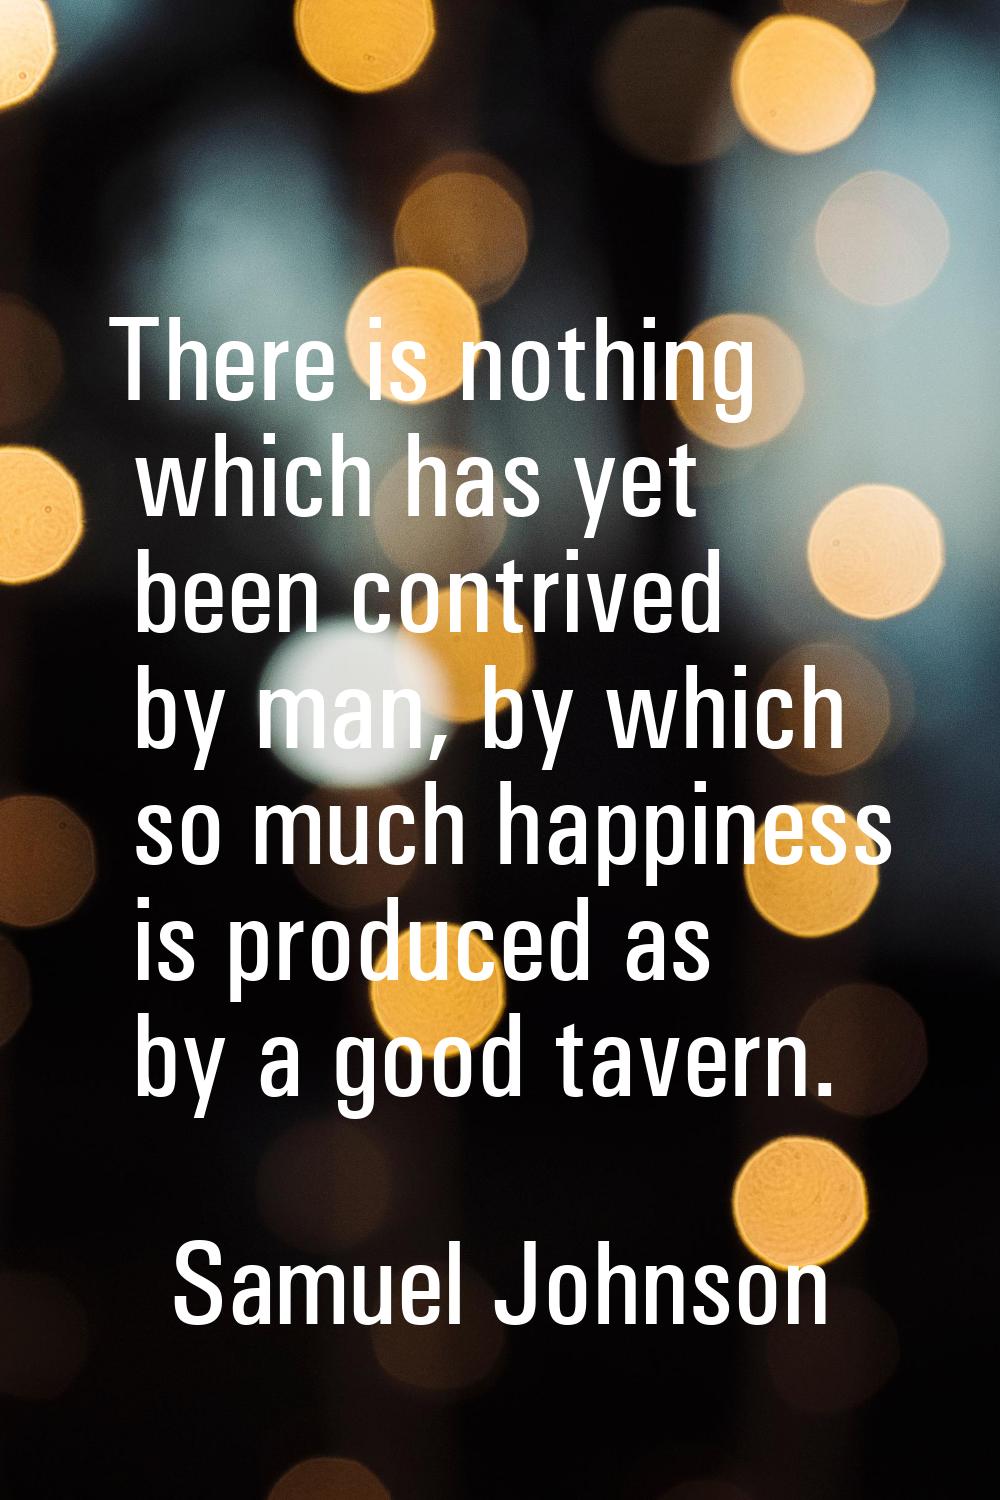 There is nothing which has yet been contrived by man, by which so much happiness is produced as by 